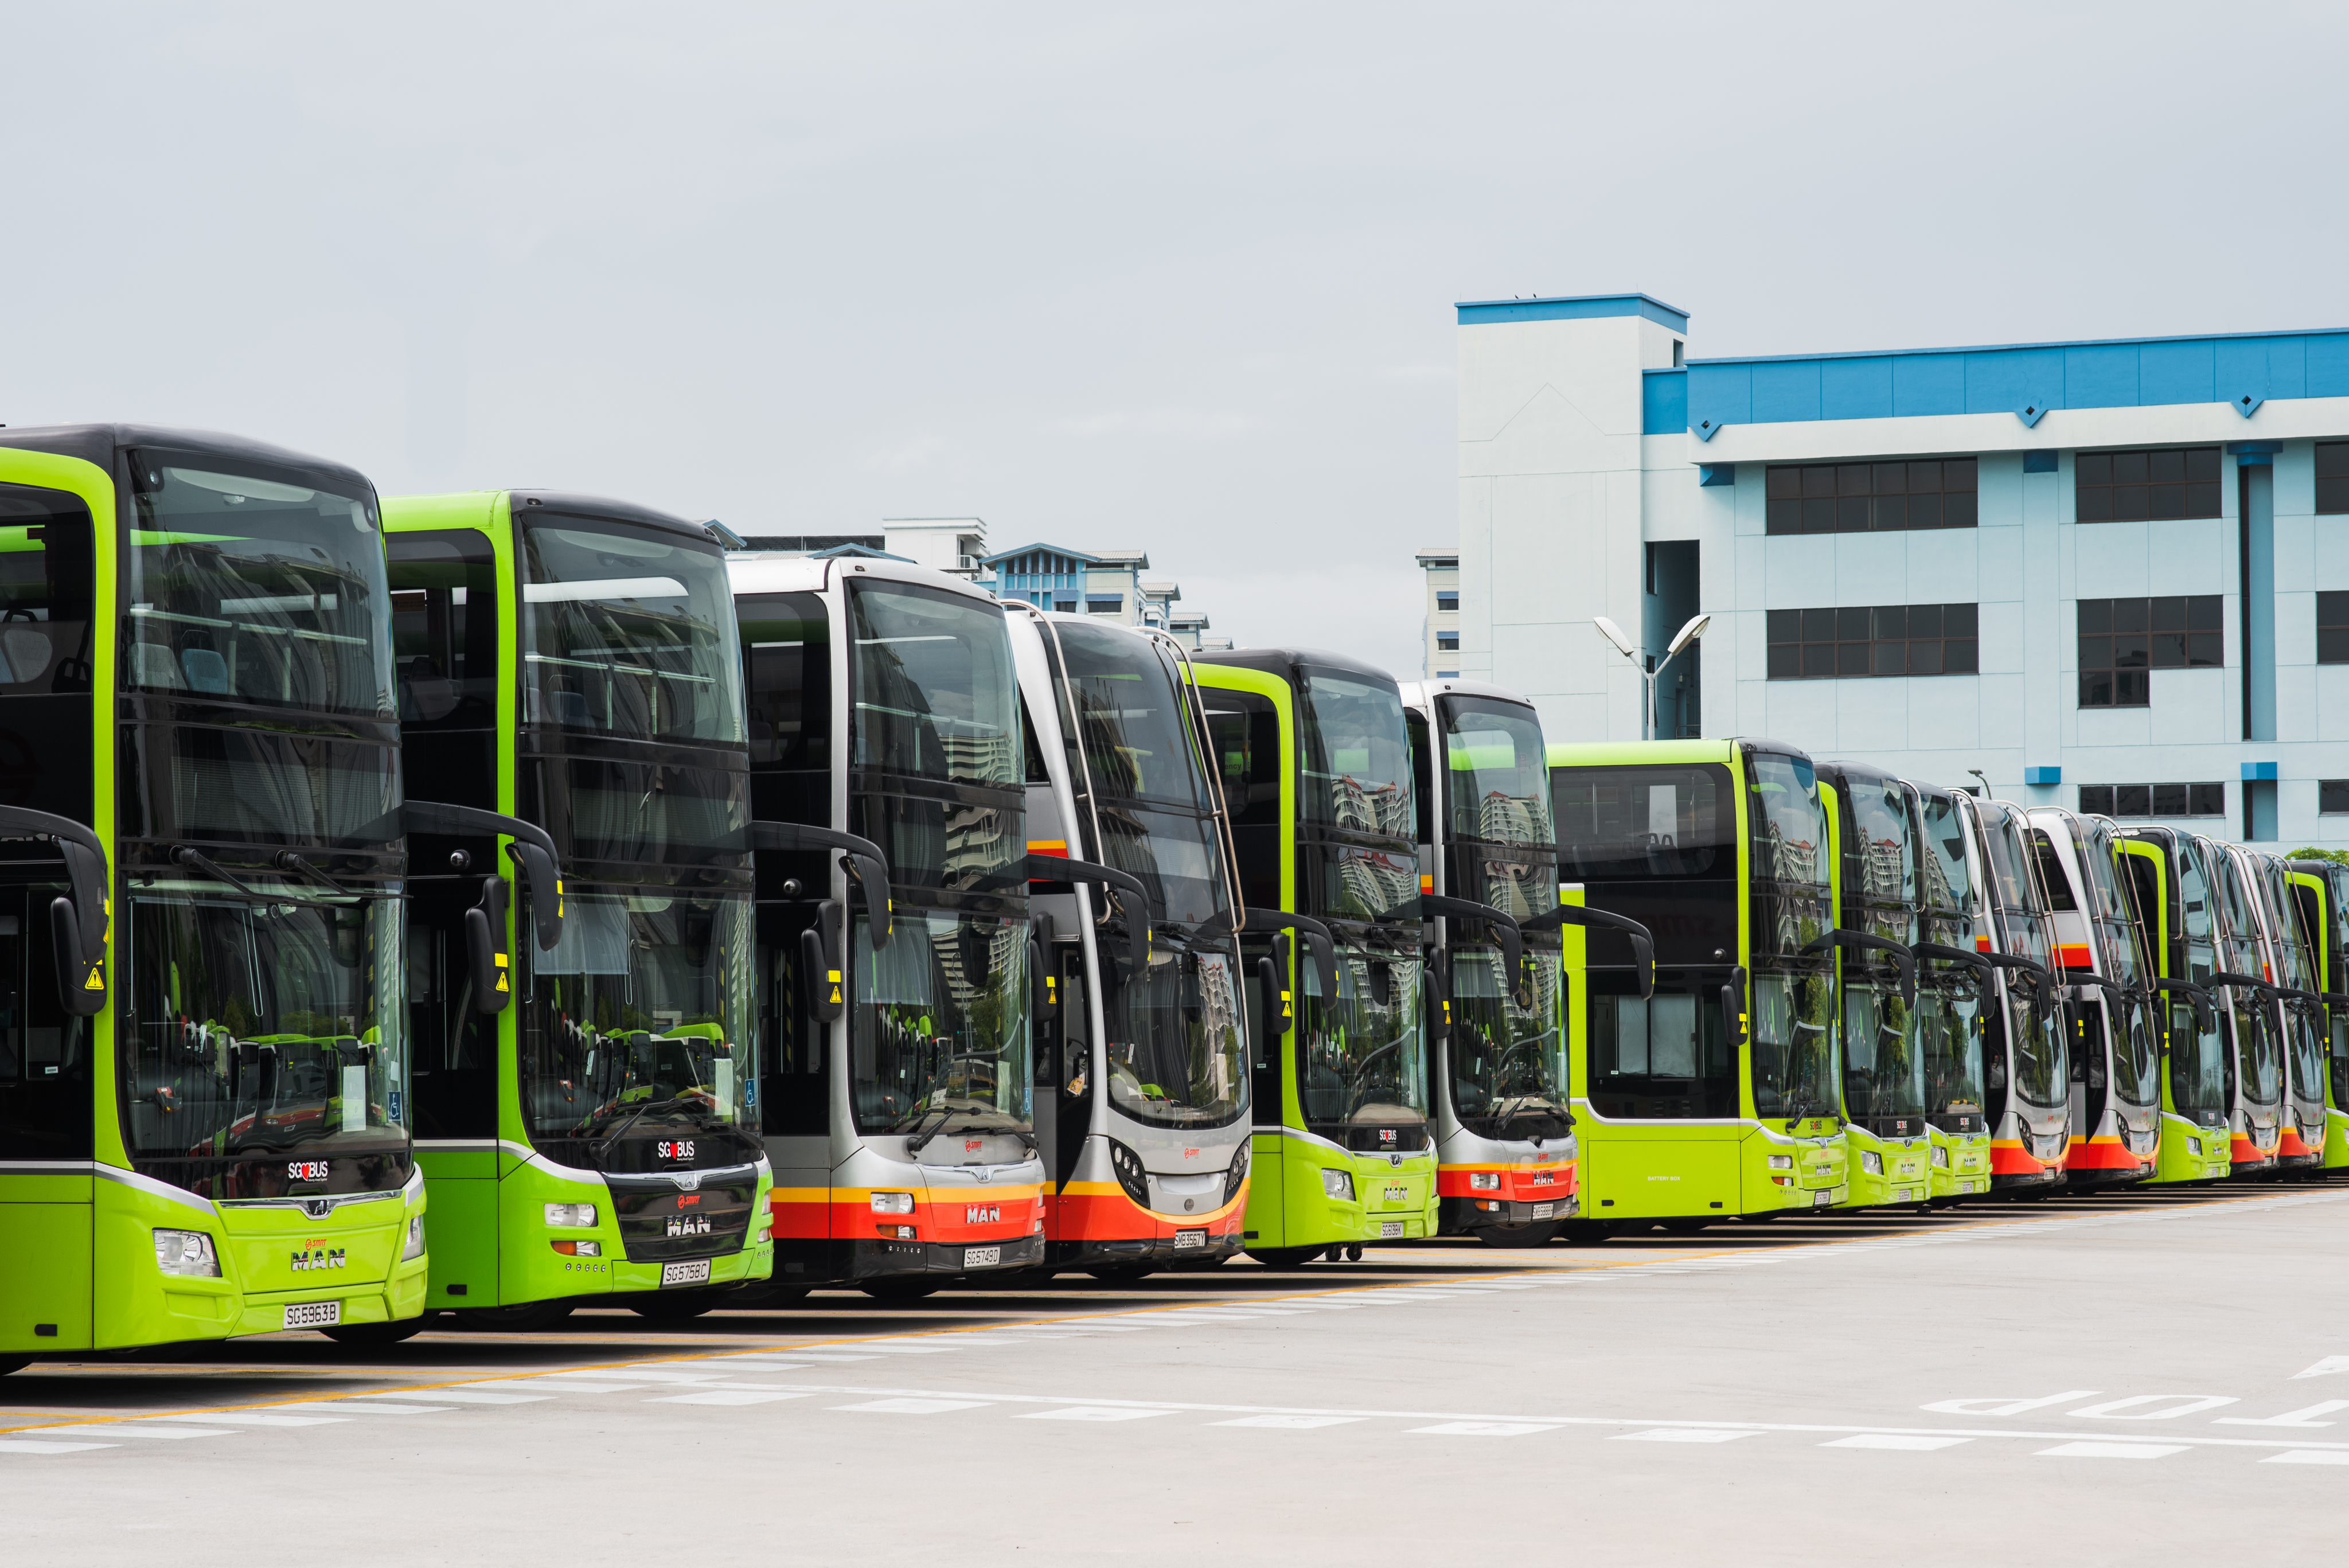 Buses in a Row - 1637951296203747655